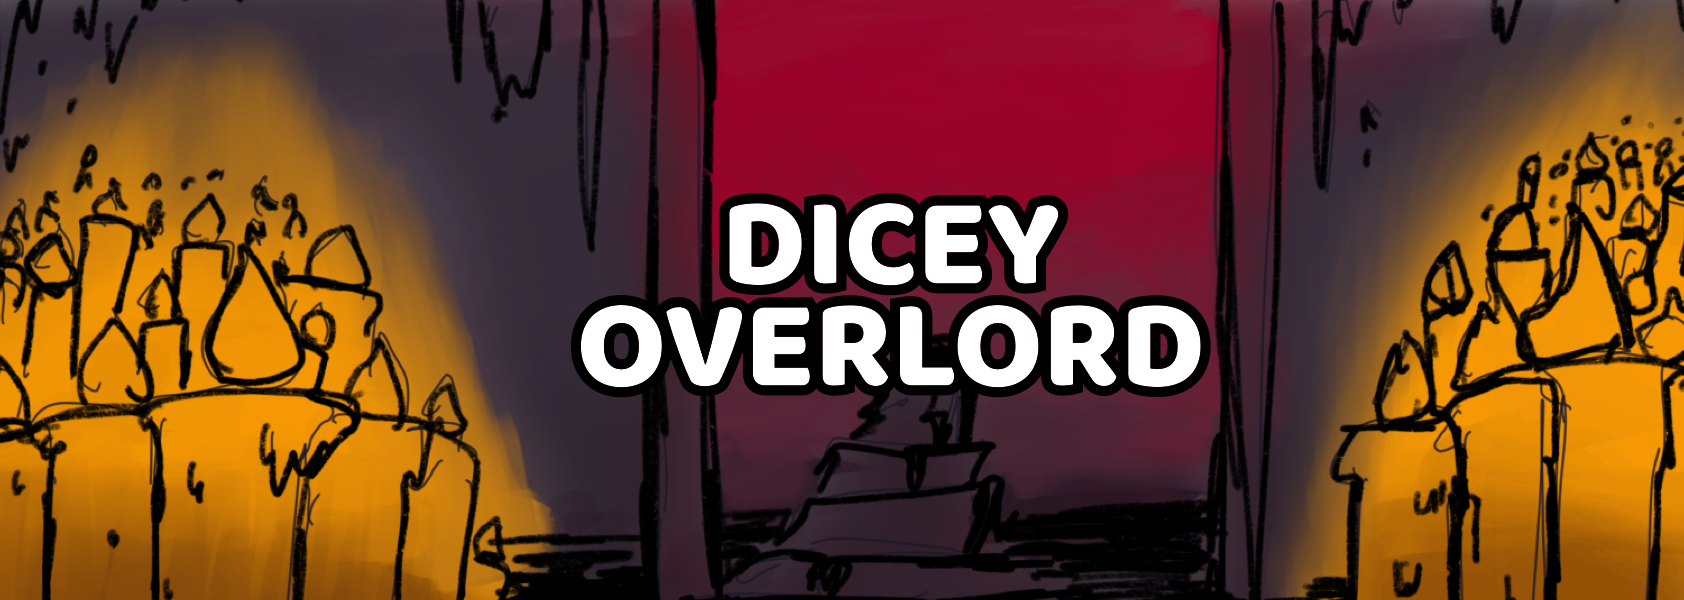 Dicey Overlord